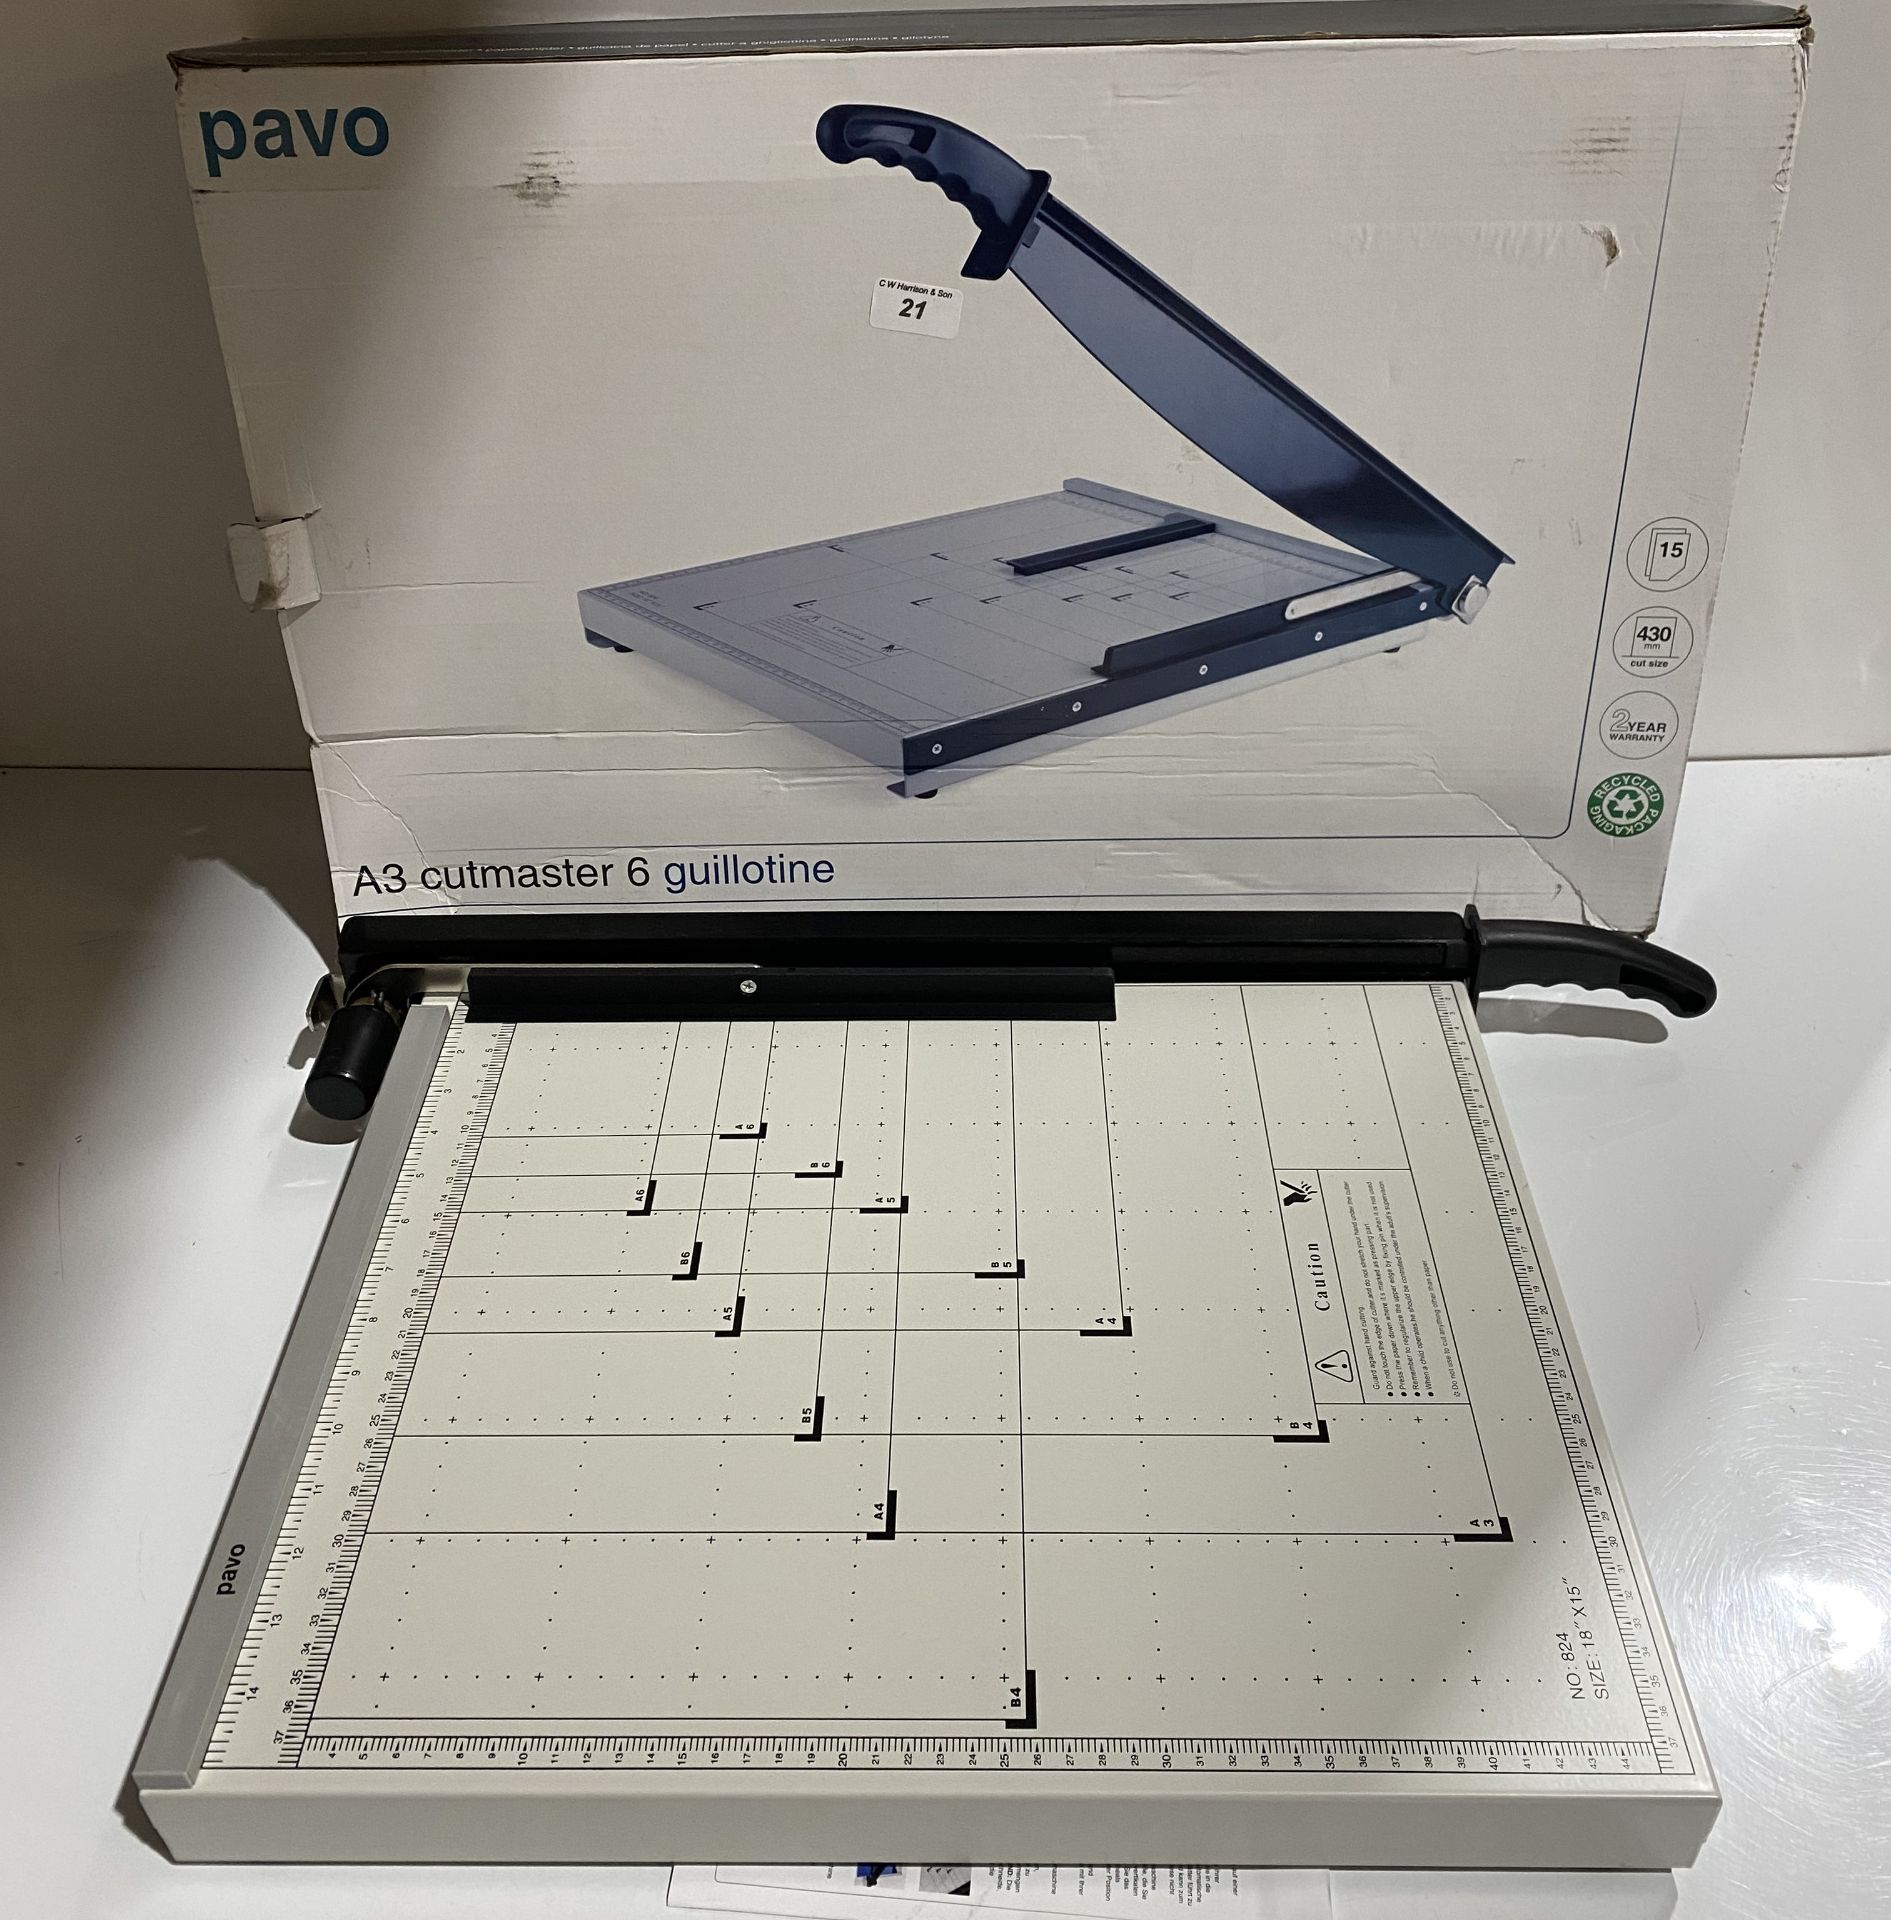 1 x new boxed Pavo cutmaster 6 metal base A3 guillotine (saleroom location: H11)